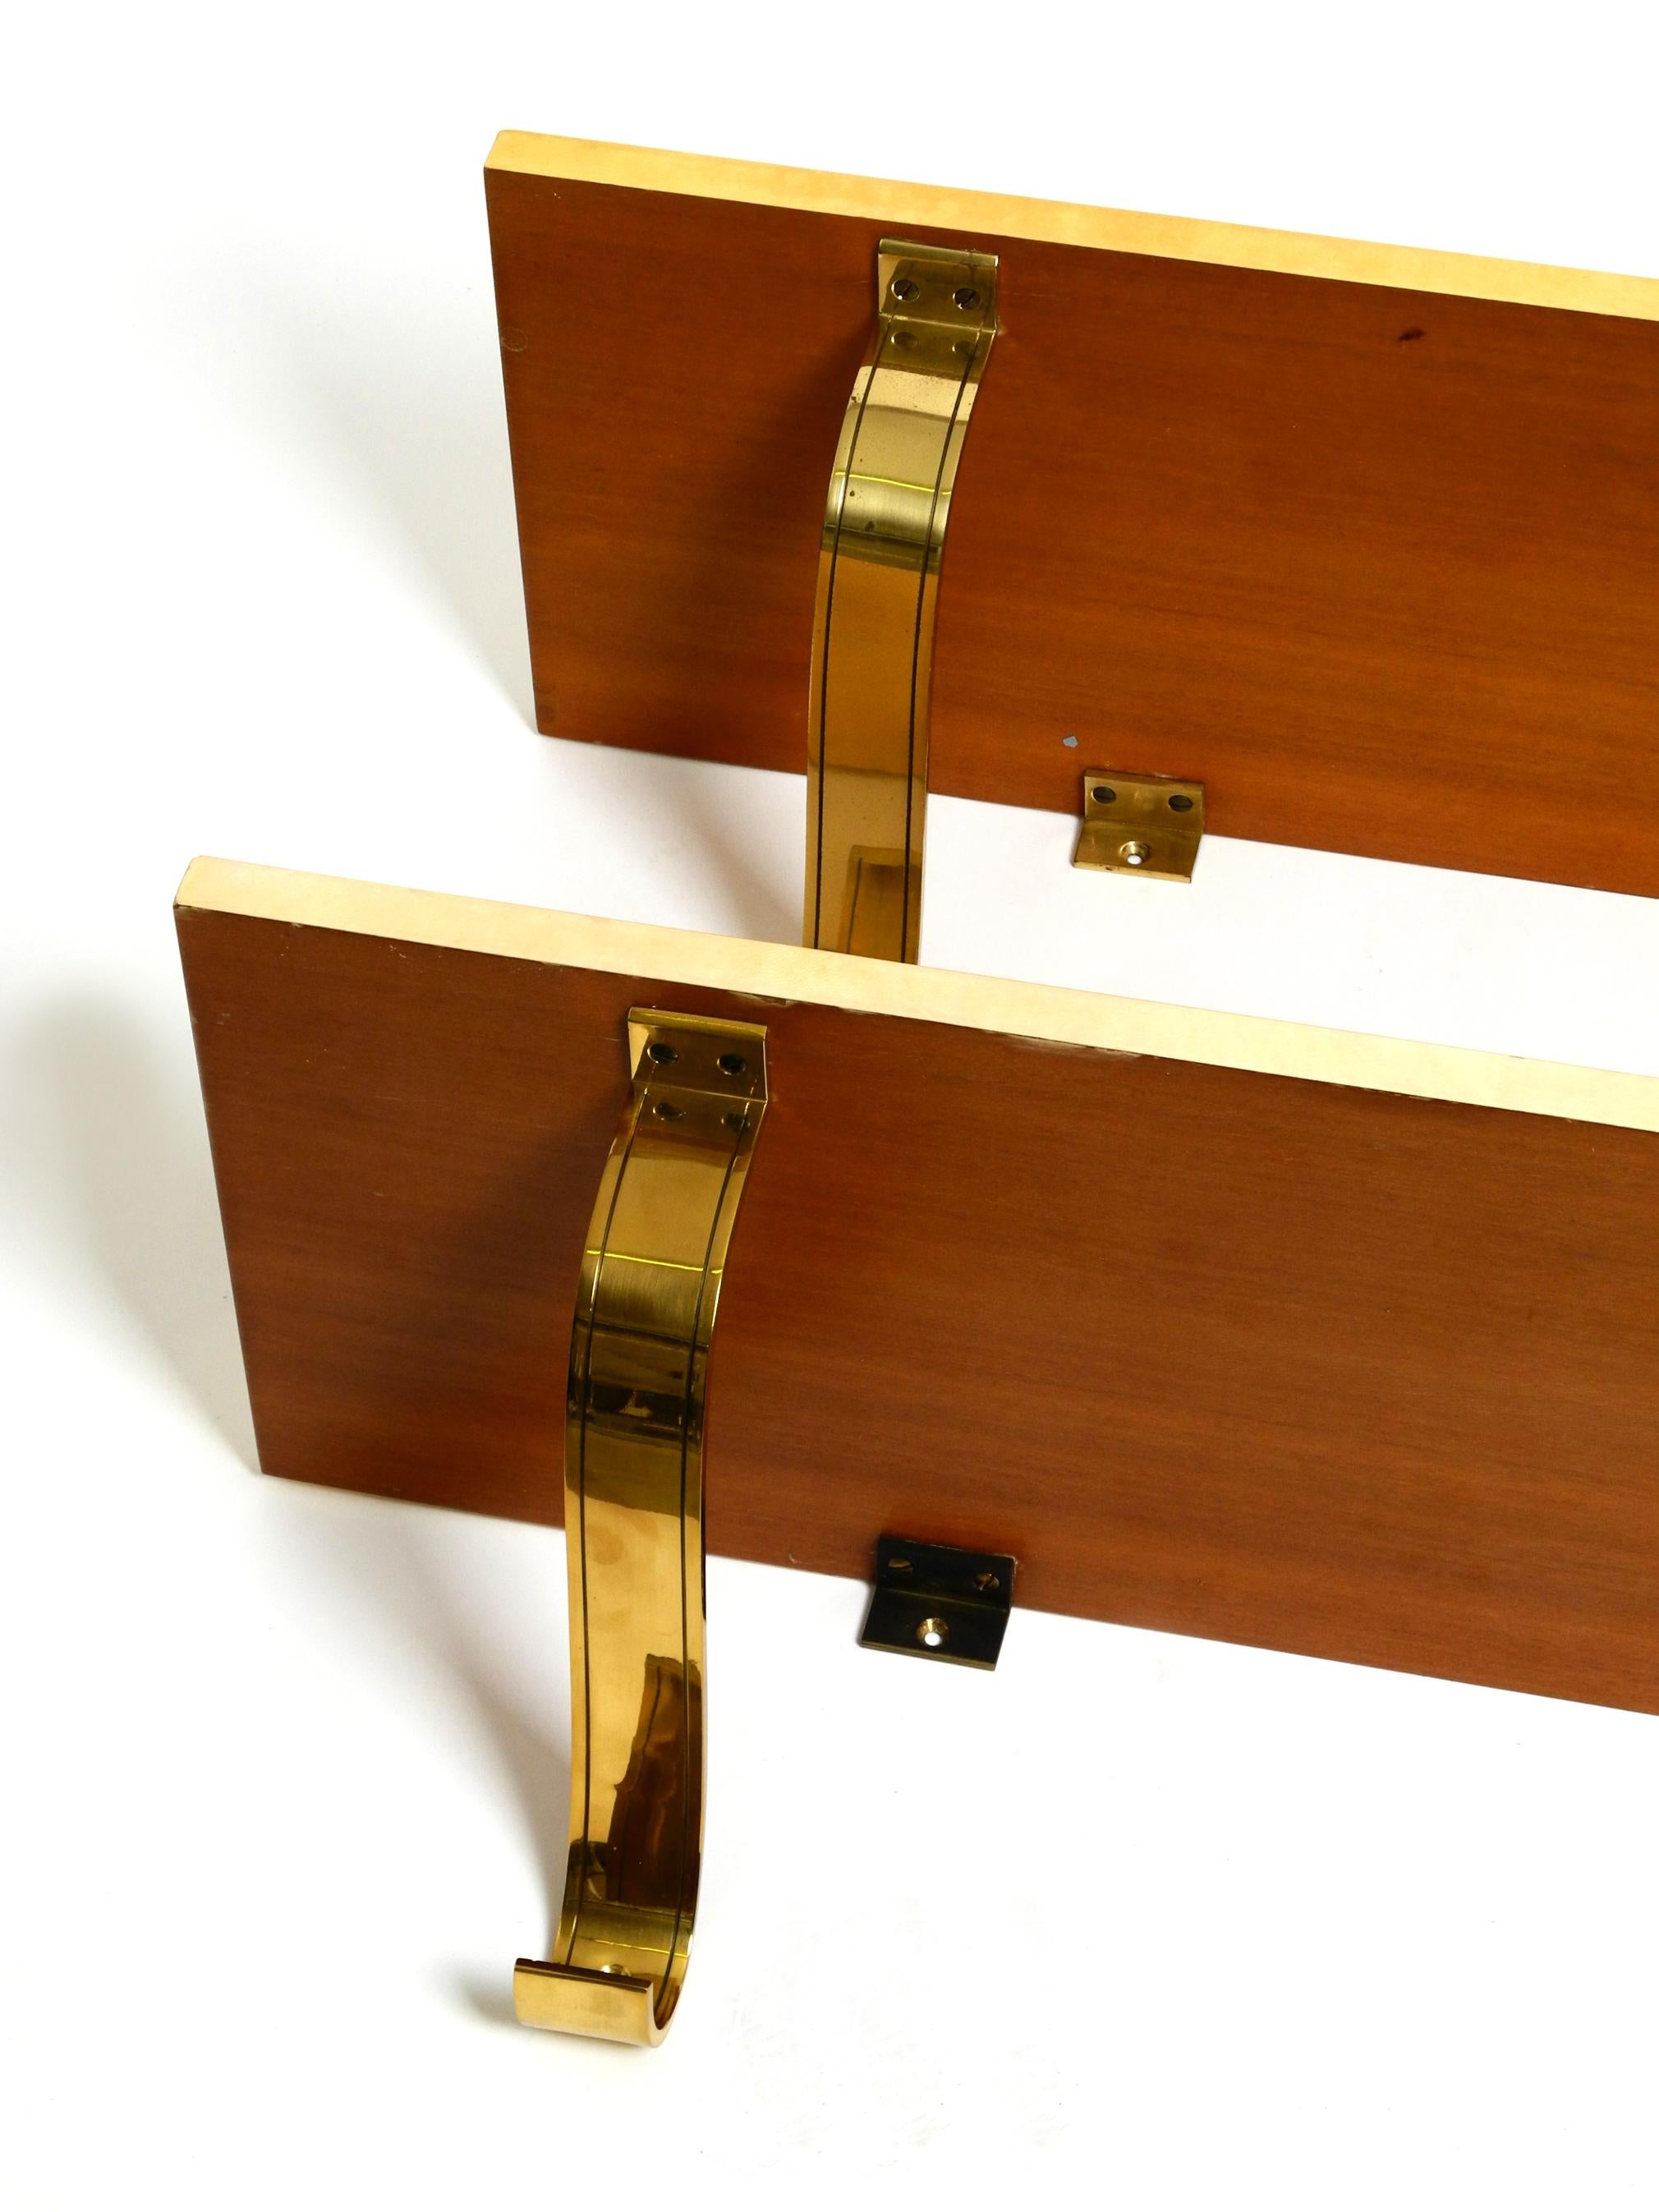 Two Beautiful, Very Rare 1960s Large Aldo Tura Shelves Made of Wood and Goatskin For Sale 9